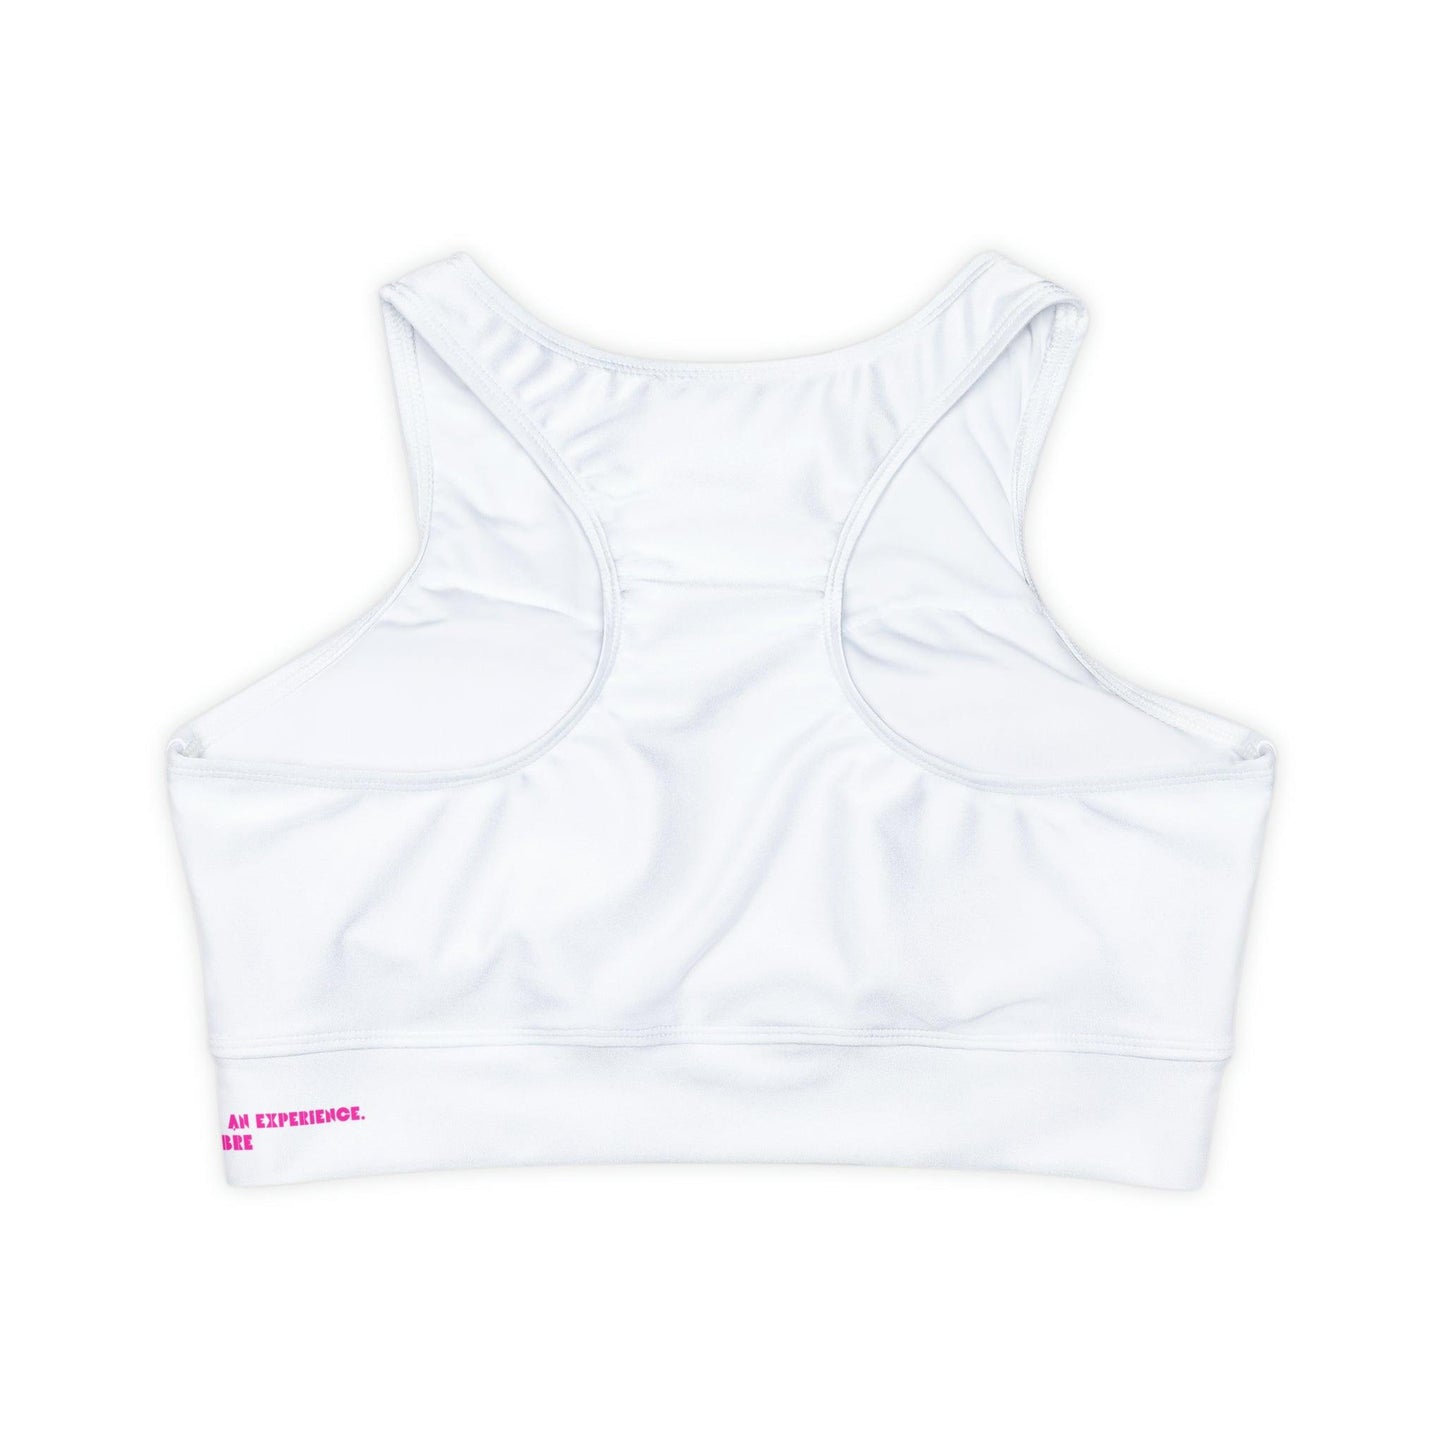 Fully Lined, White Padded Sports Bra - COFFEEBRE